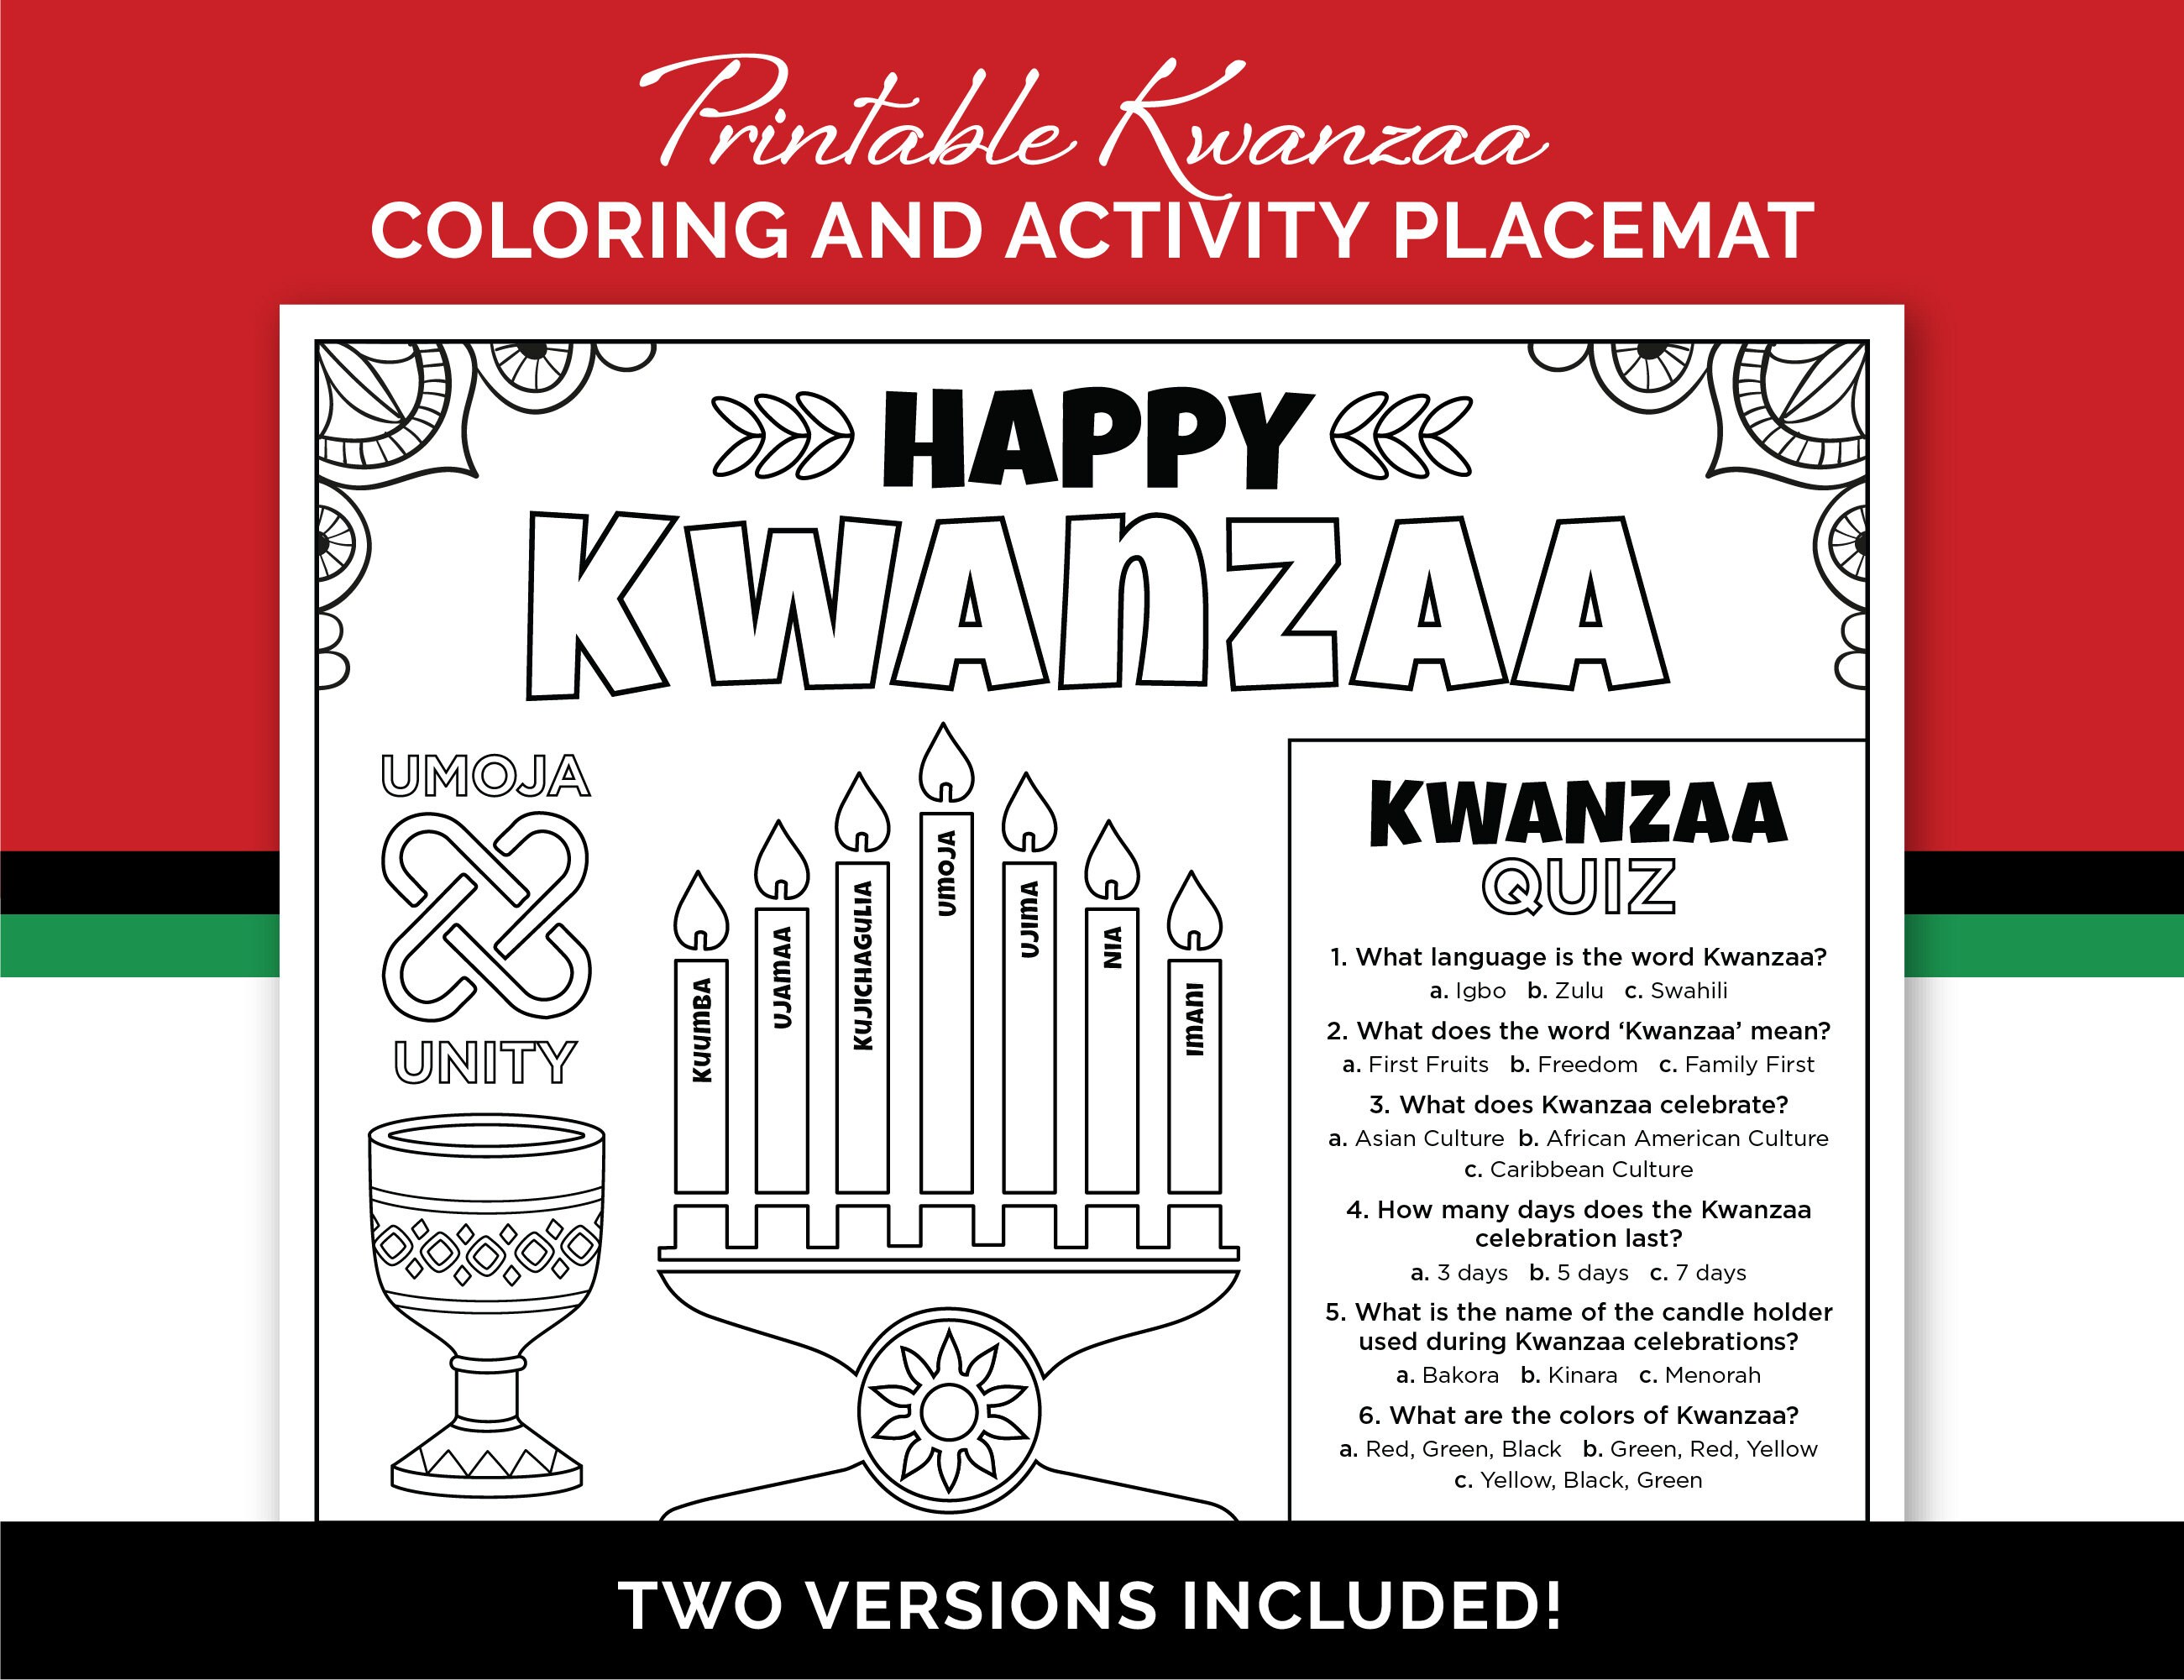 Kwanzaa kids coloring and activities page printable kids activity placemat for a kwanzaa celebration or a kids kwanzaa classroom party